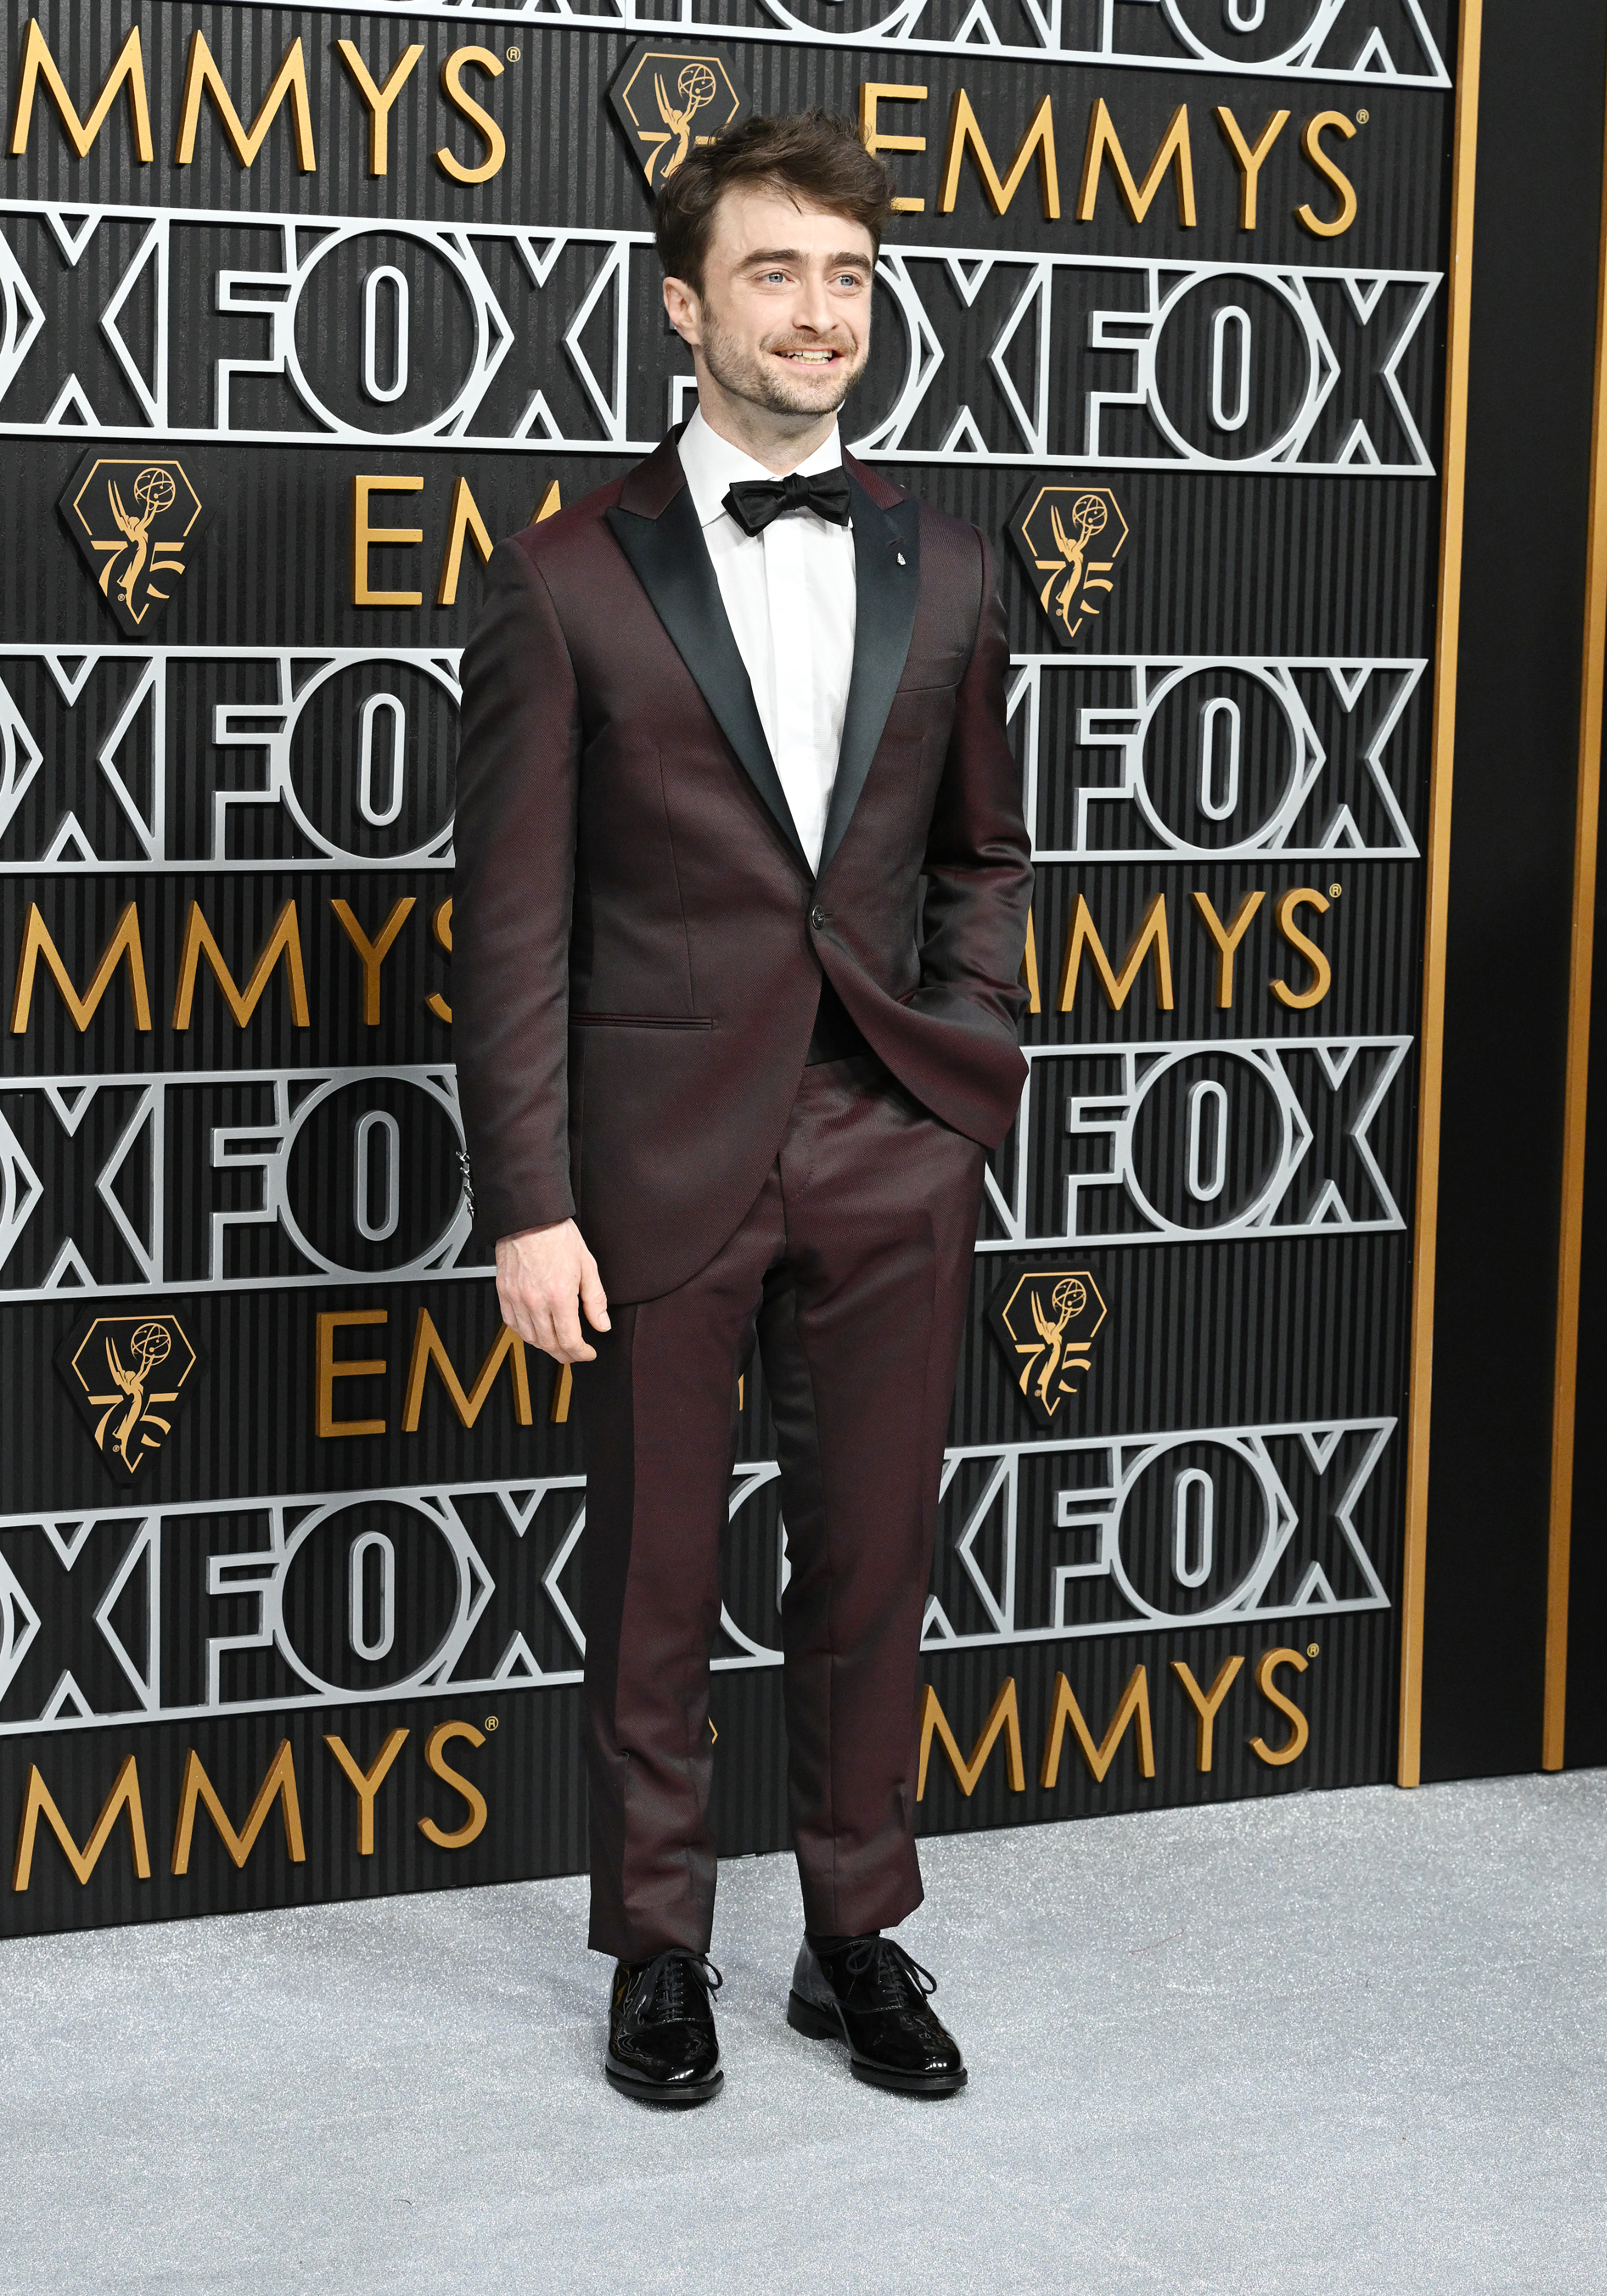 Daniel Radcliffe in a dark suit with a bowtie at the Emmys backdrop